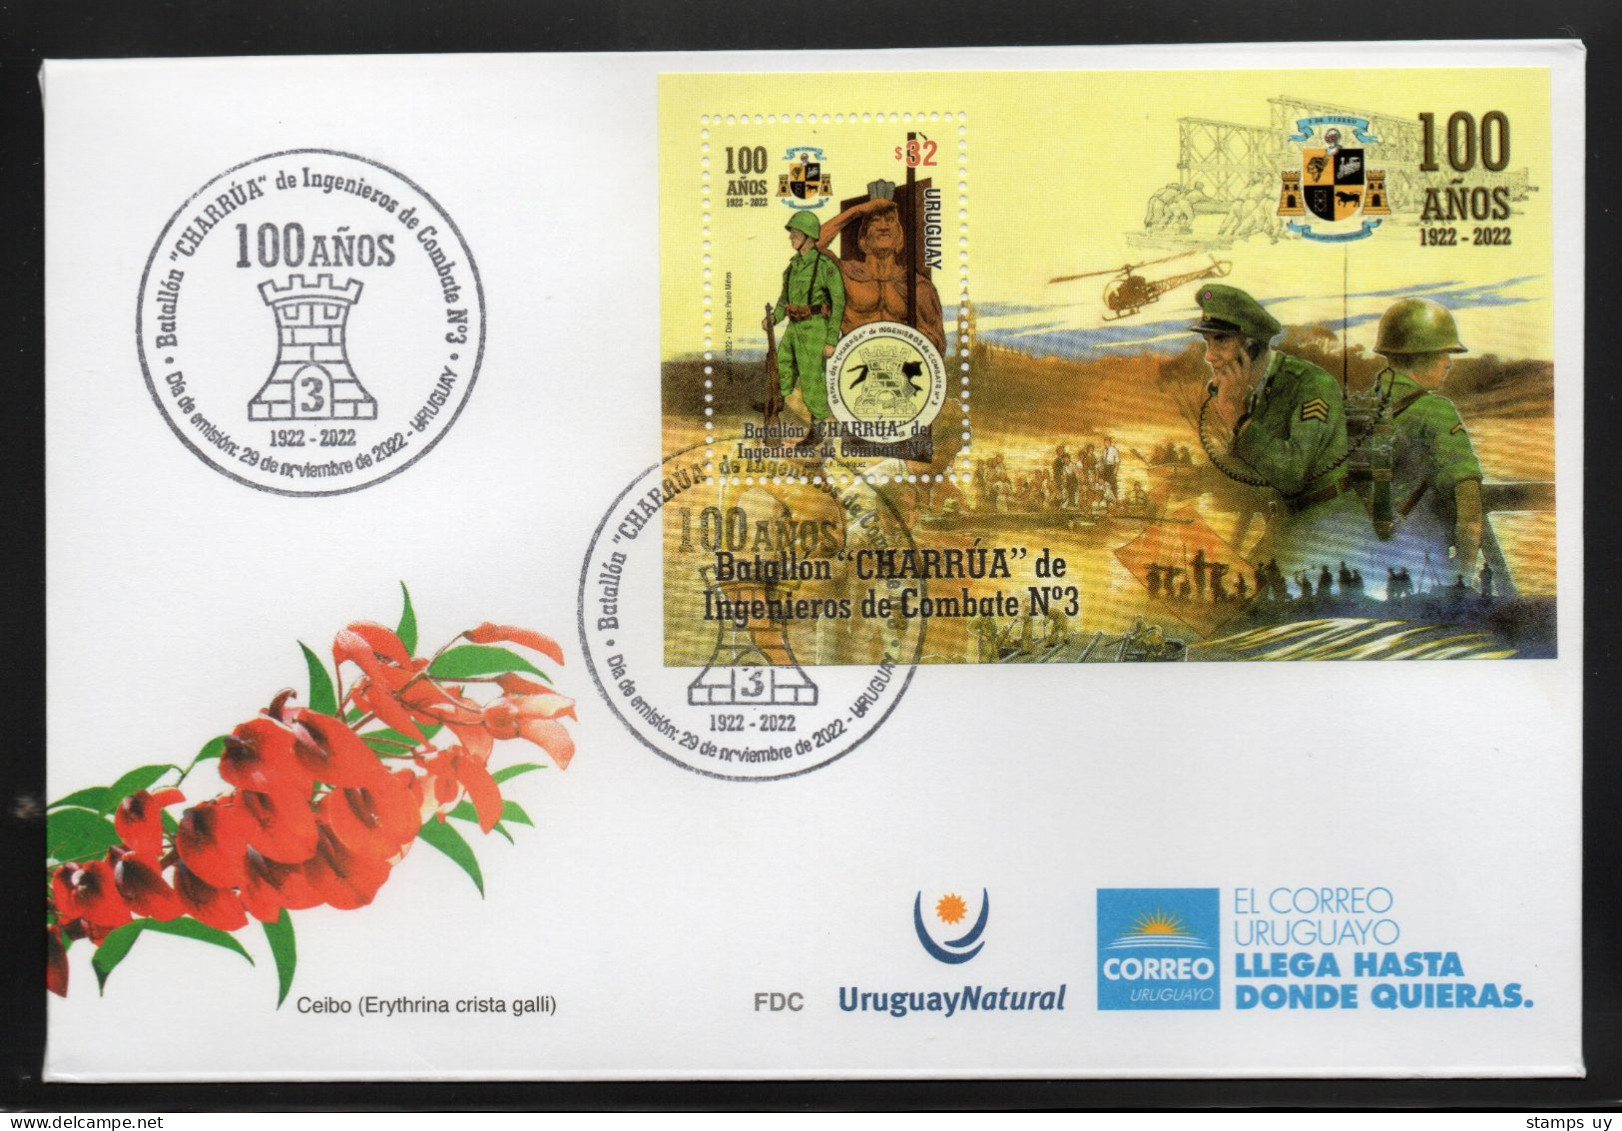 URUGUAY 2022 (Militar, Comunications, Engineers, Helicopters, Bell 47G, Trains, Radio, Indigenous, Sculptures) - 1 FDC - Vaches